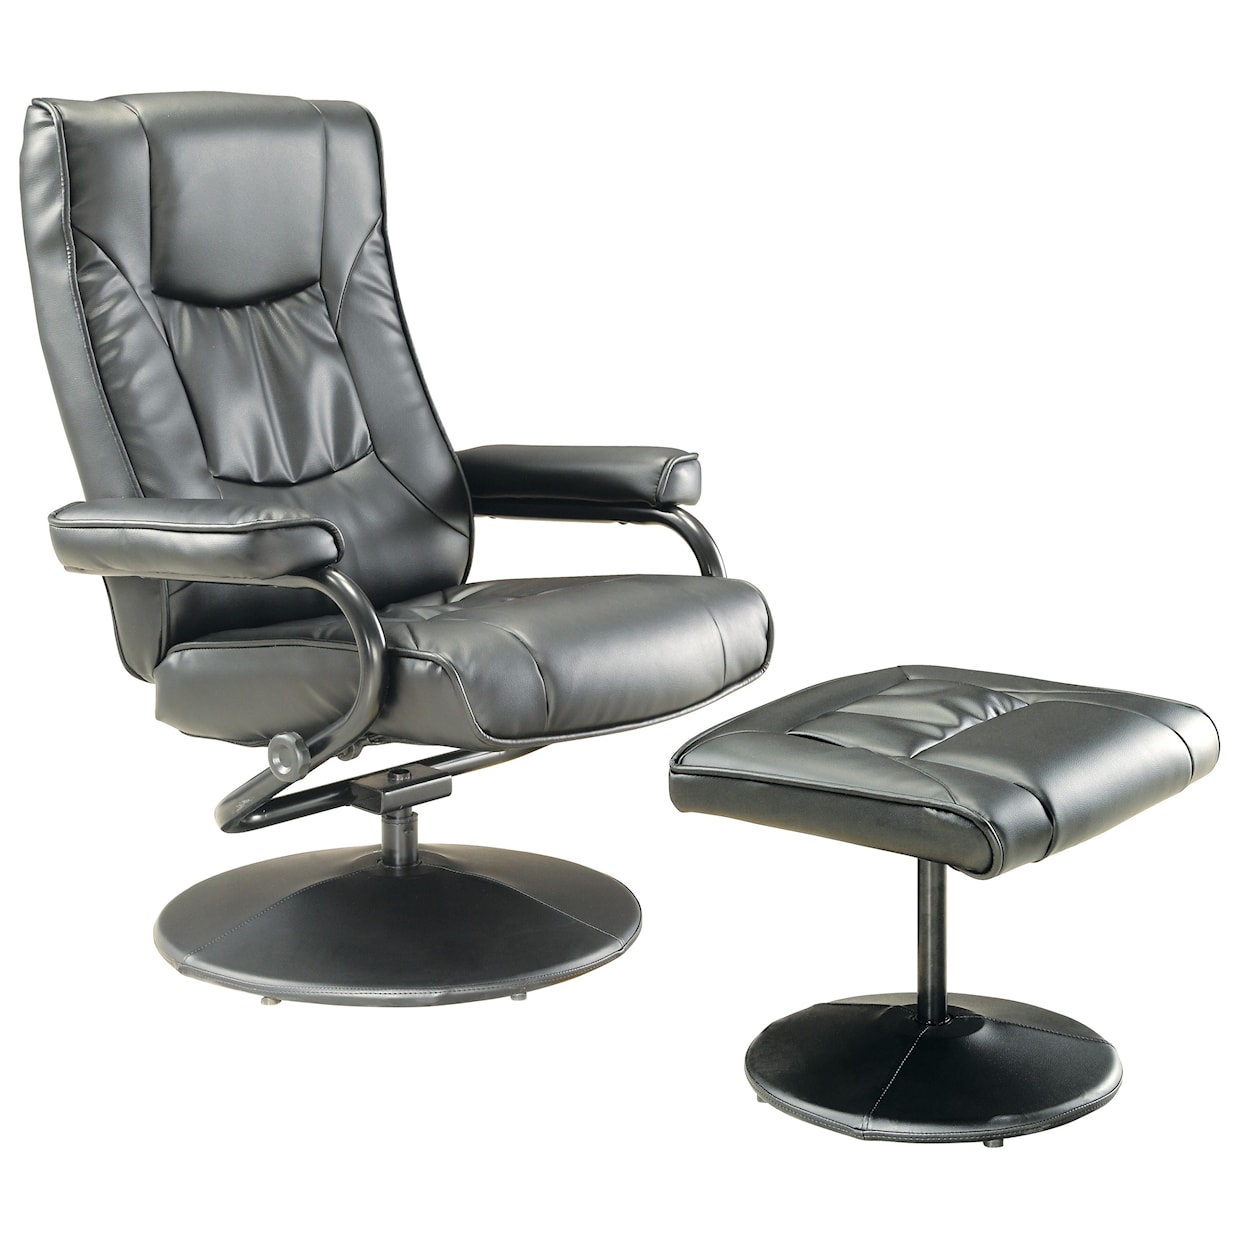 Offshore Furniture Source Chairs Grey Swivel Recliner and Ottoman